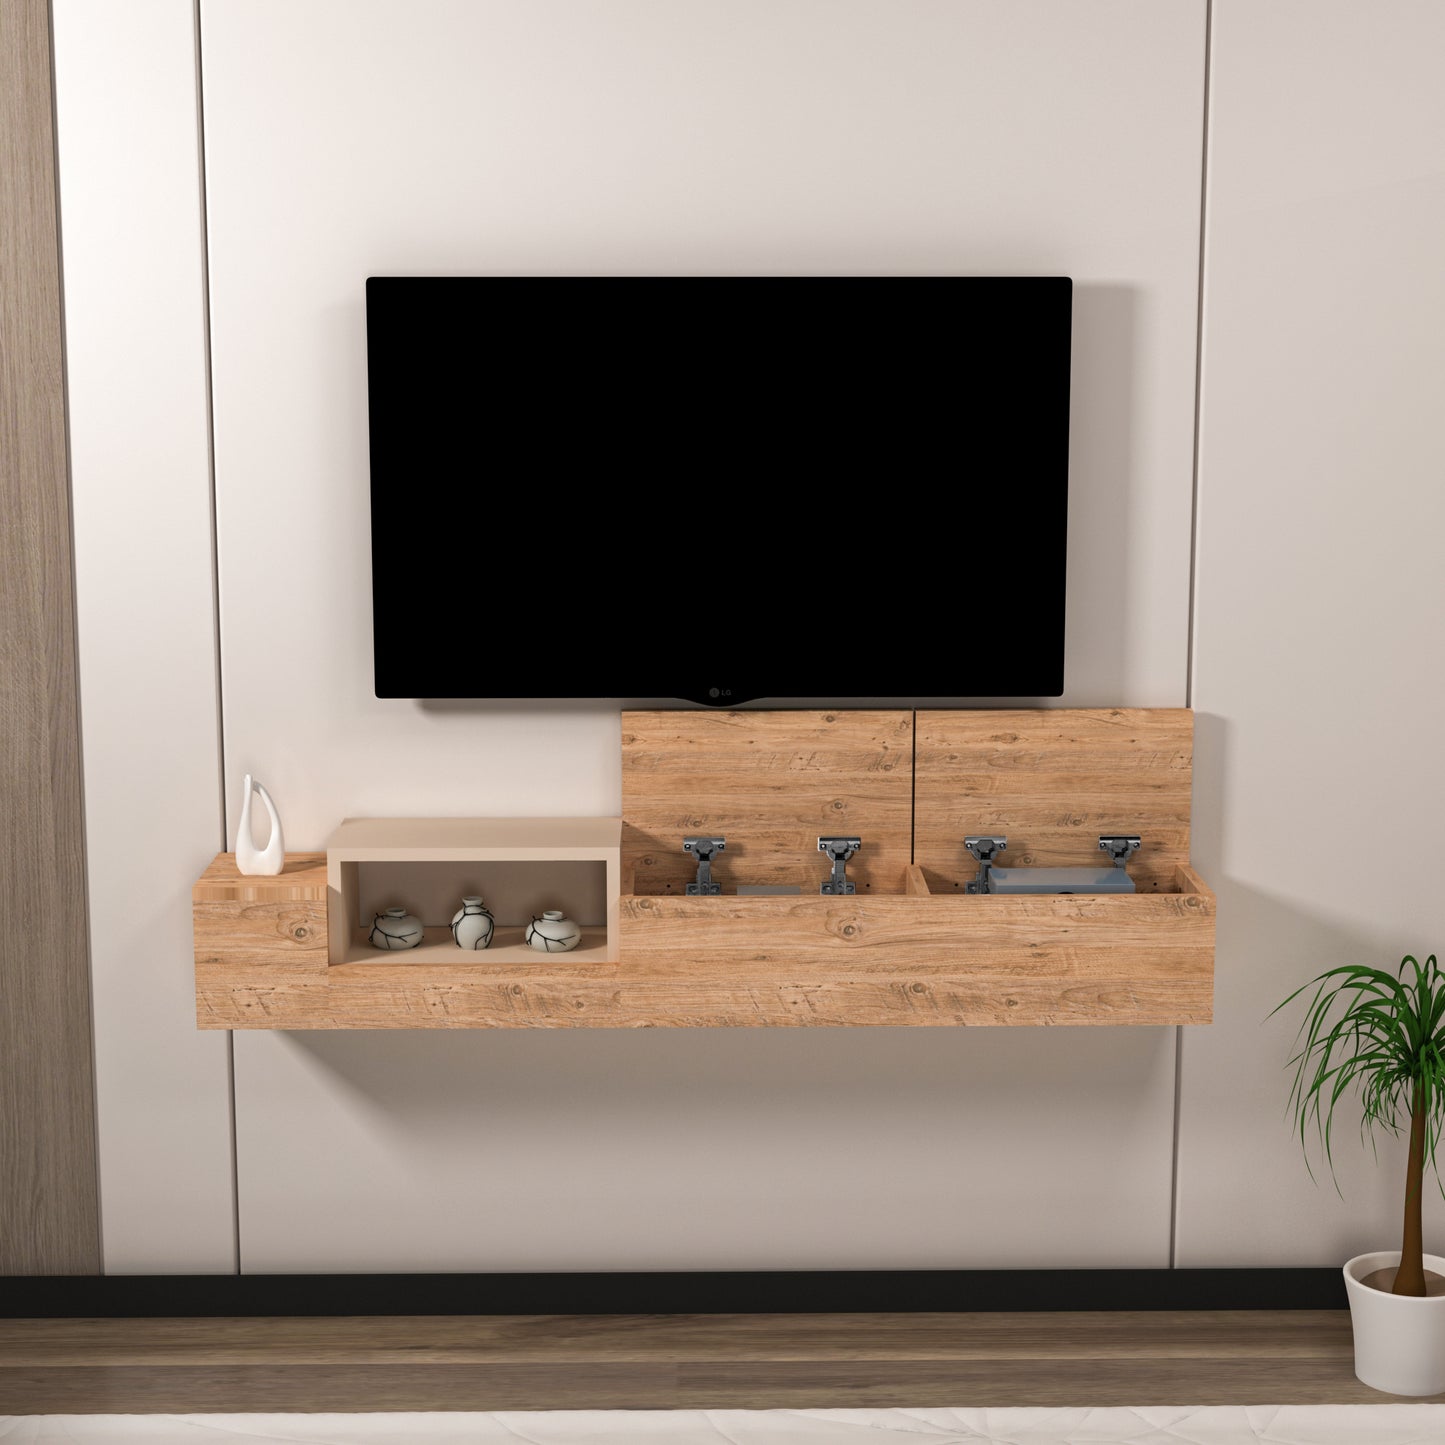 Floating TV Stand with Shelves Sarah